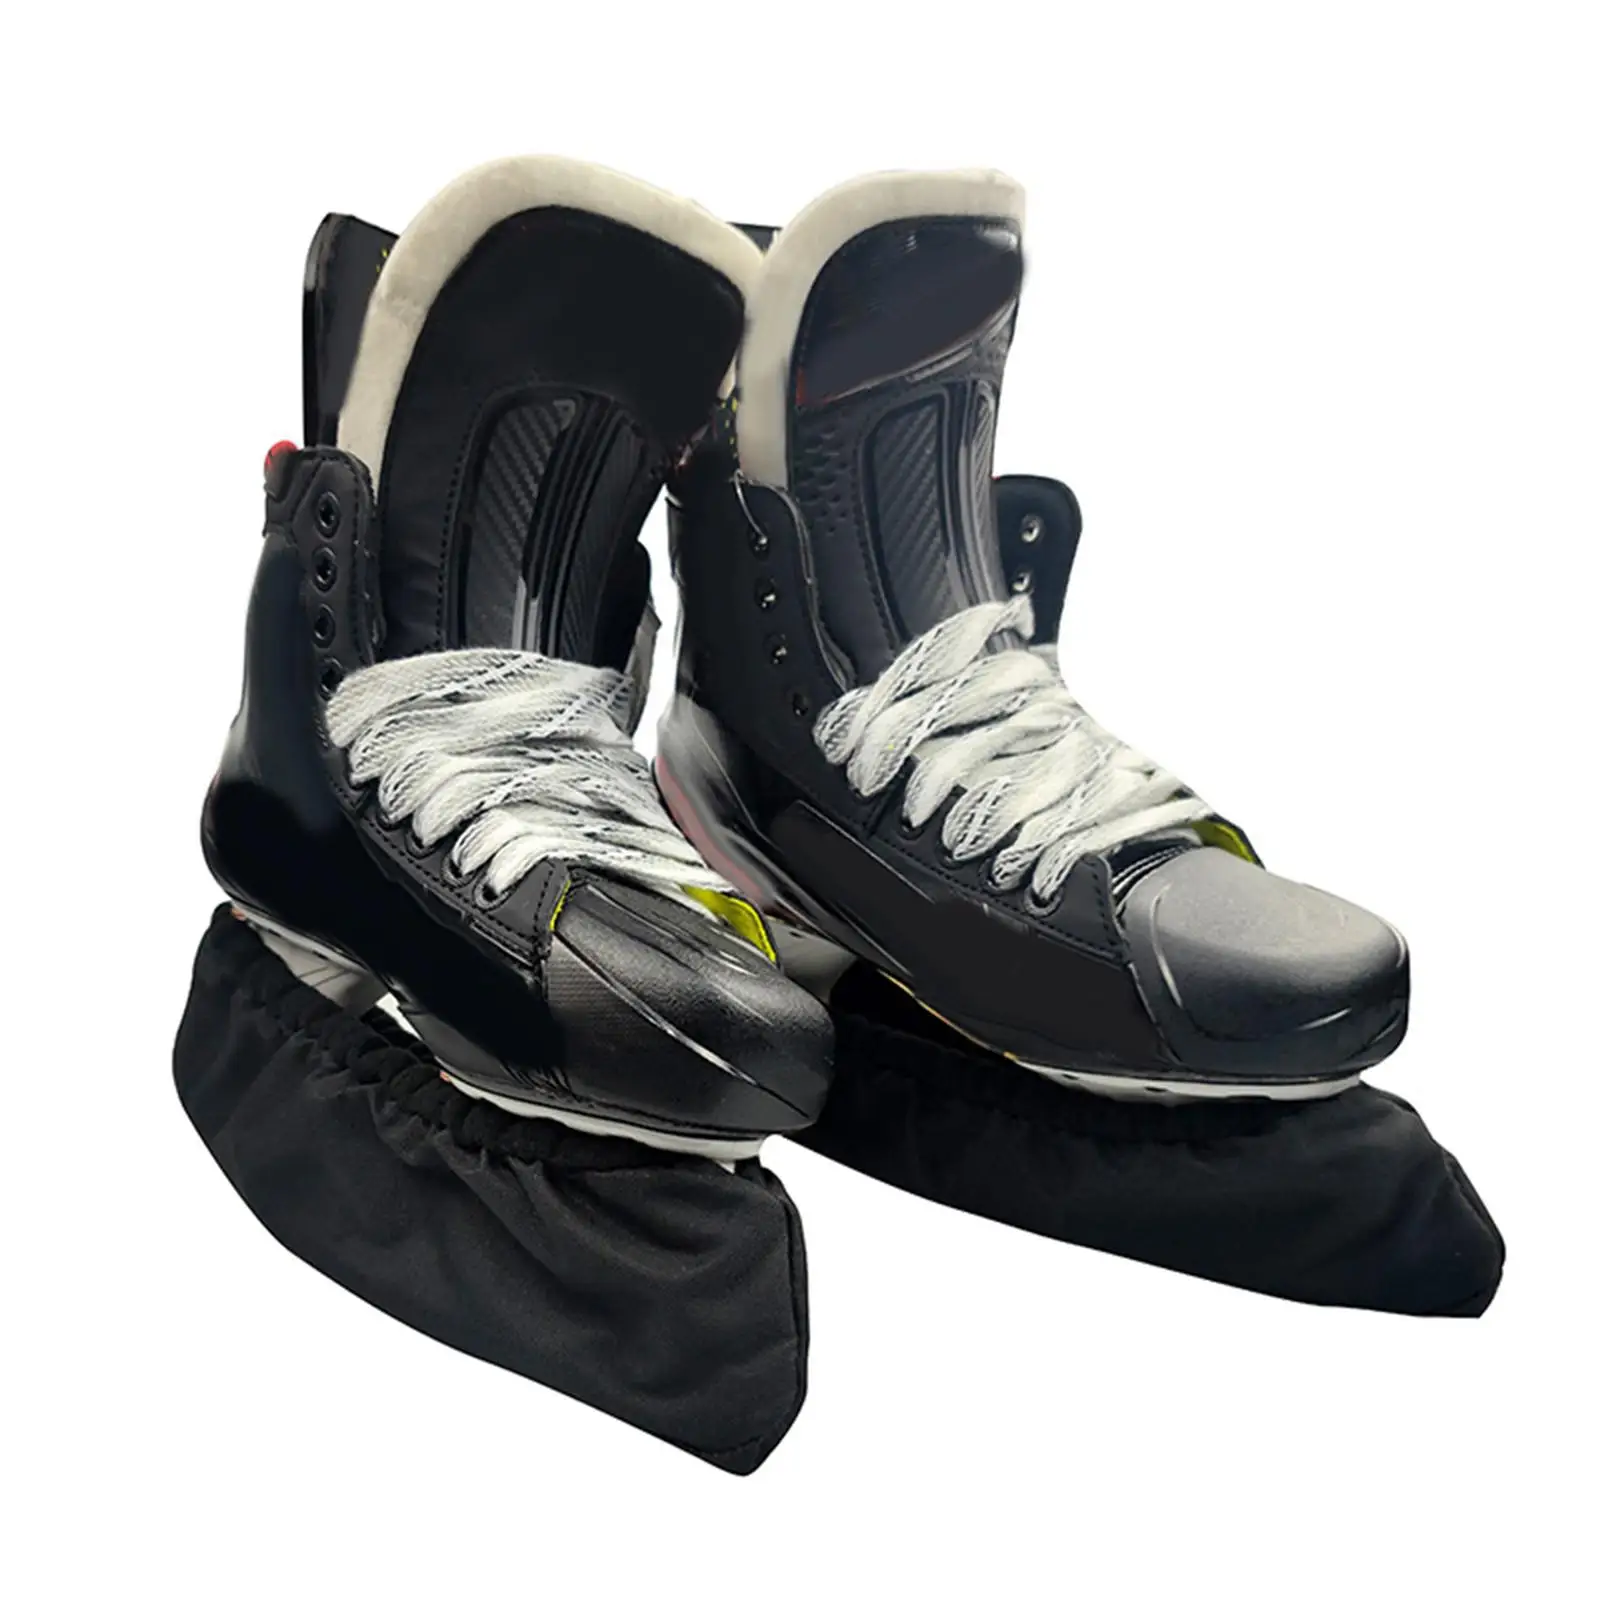 Ice Skate Blade Covers Protect Sleeve Hockey Shoes Skating Guard